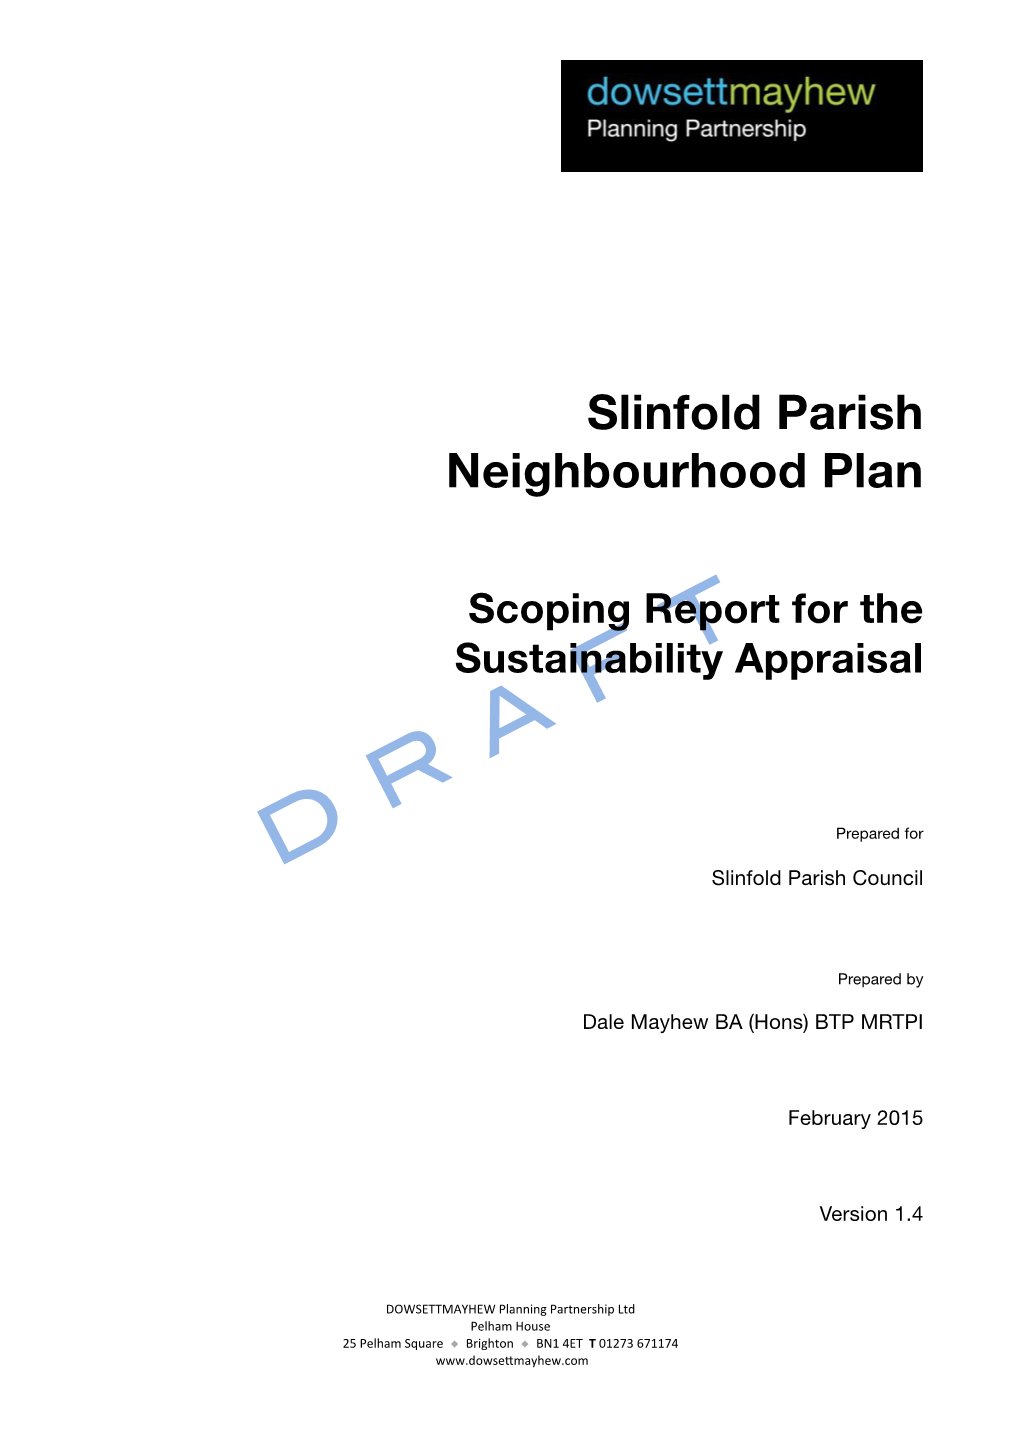 Scoping Report for the Sustainability Appraisal